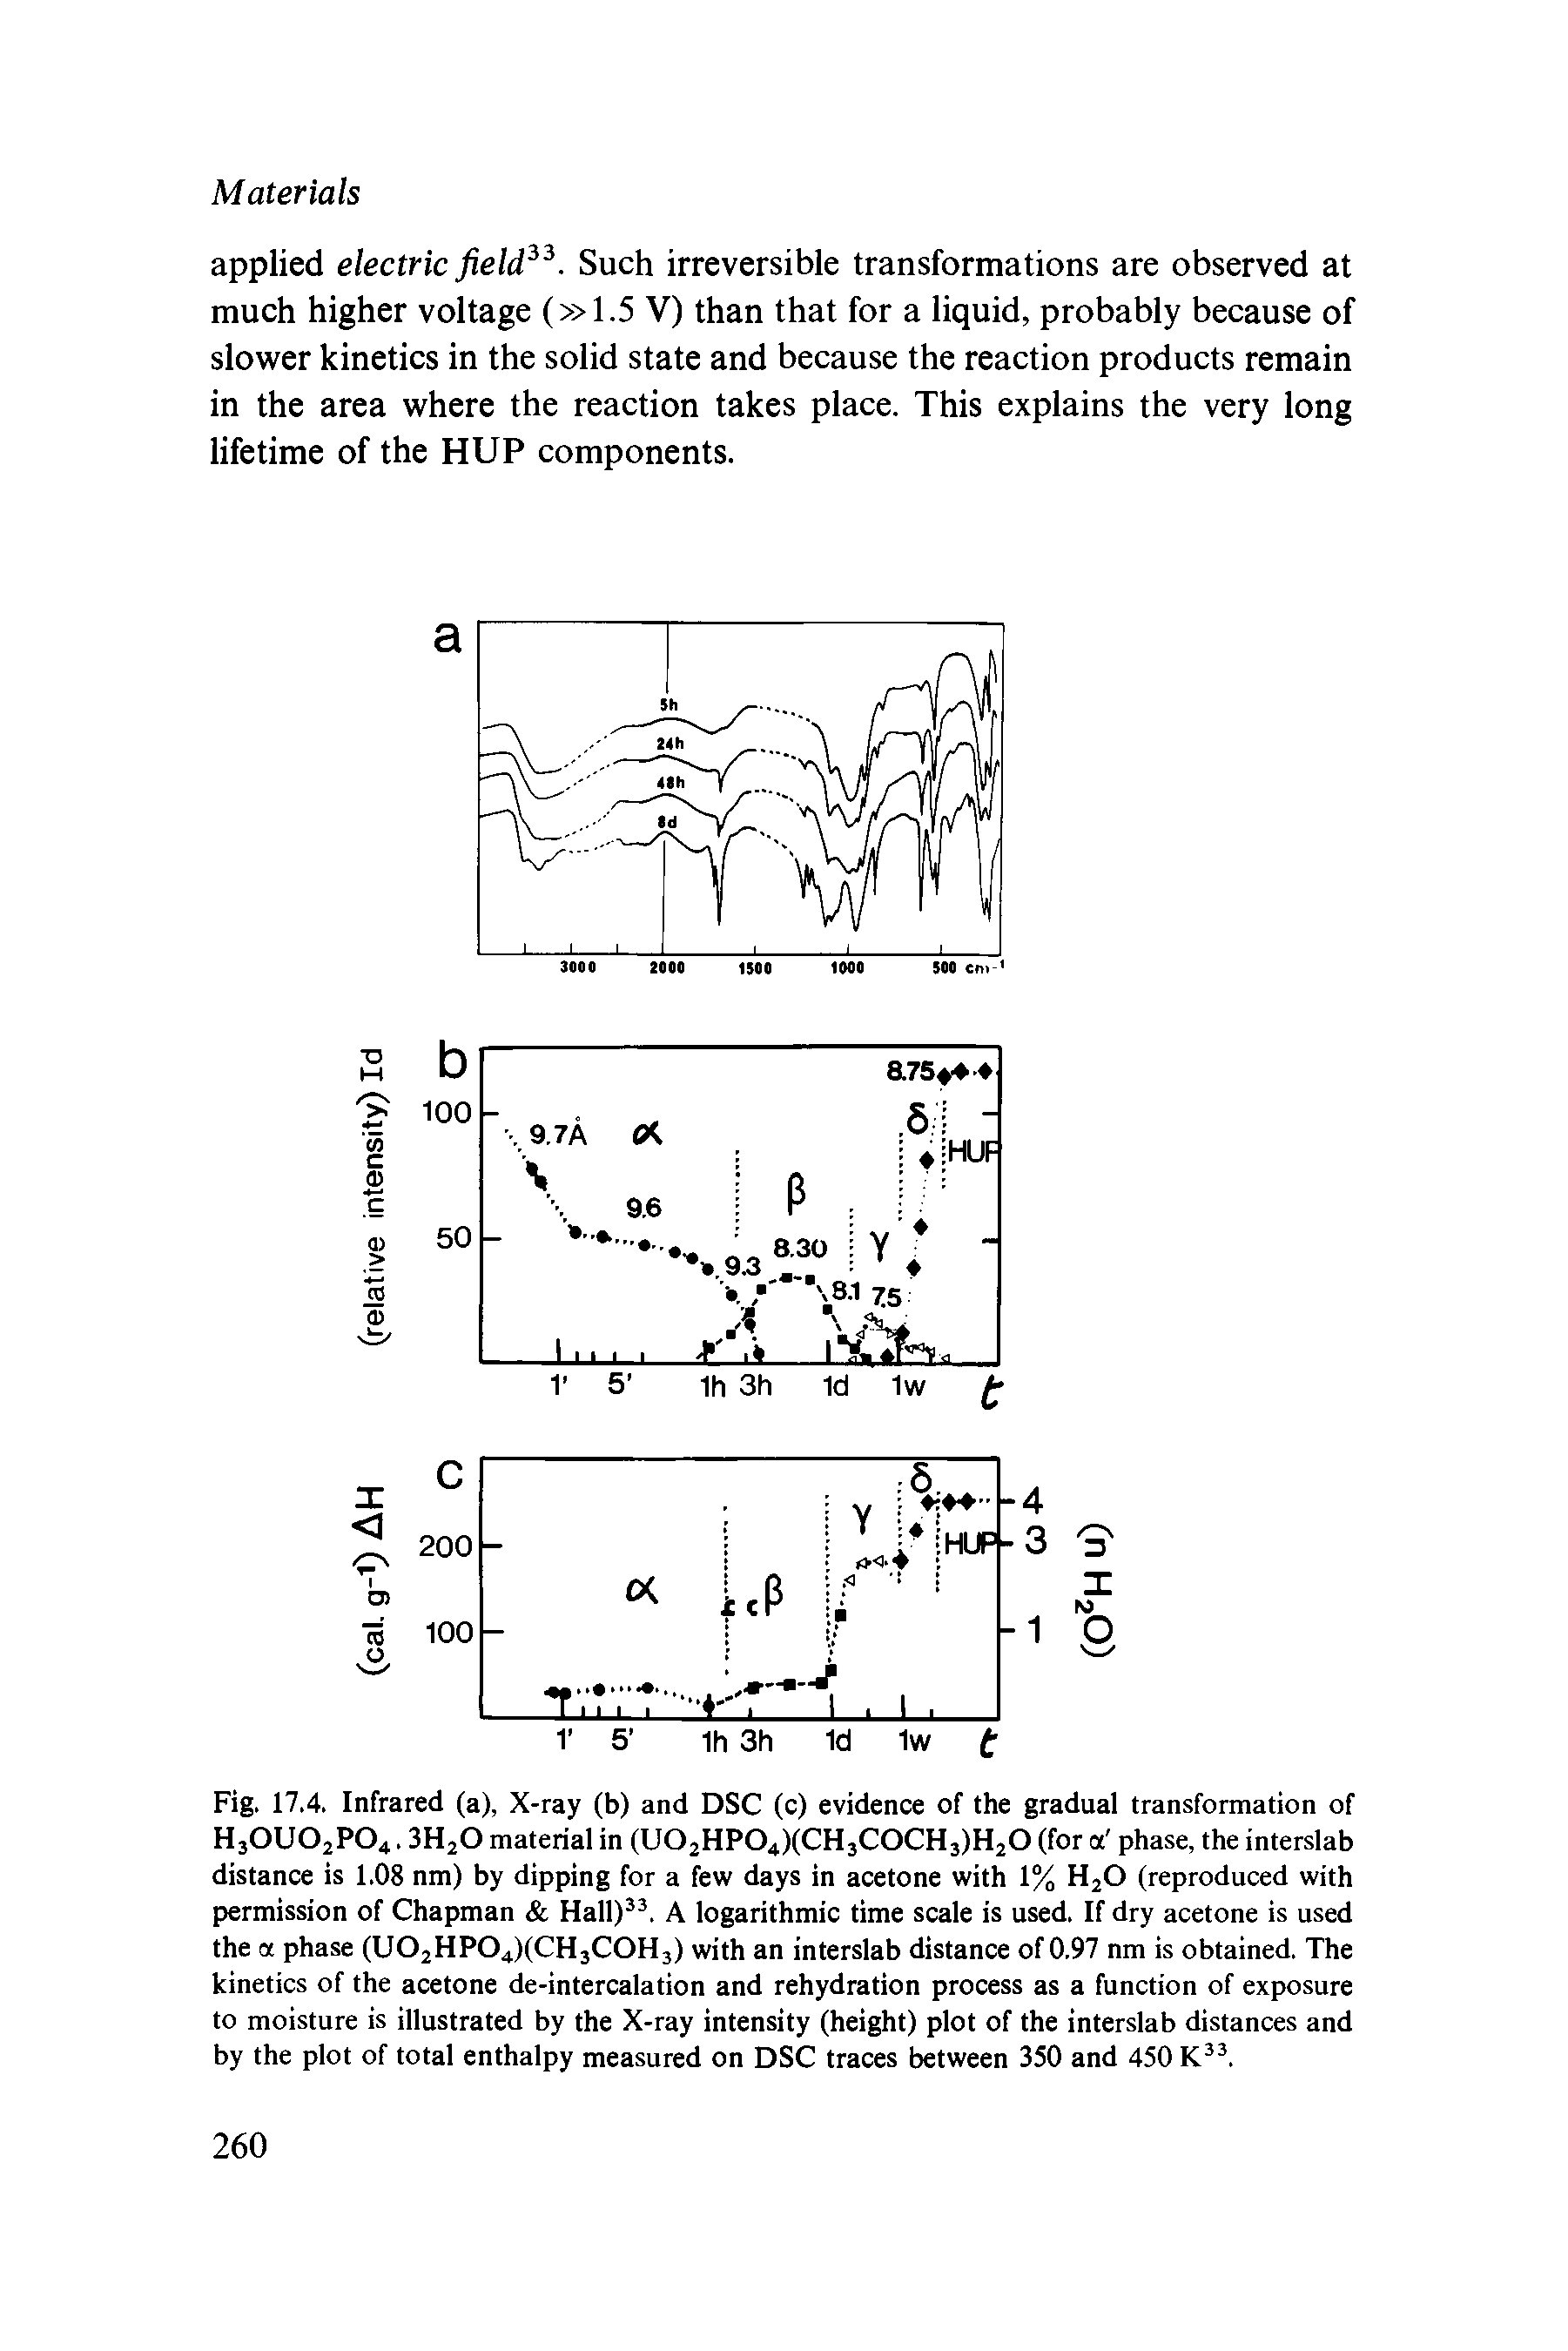 Fig. 17.4. Infrared (a). X-ray (b) and DSC (c) evidence of the gradual transformation of H3OUO2PO4. SHjO material in (U02HP04)(CH3C0CH3)H20 (for a phase, the interslab distance is 1.08 nm) by dipping for a few days in acetone with 1% HjO (reproduced with permission of Chapman Hall). A logarithmic time scale is used. If dry acetone is used the a phase (UO2HPO4XCH3COH3) with an interslab distance of 0.97 nm is obtained. The kinetics of the acetone de-intercalation and rehydration process as a function of exposure to moisture is illustrated by the X-ray intensity (height) plot of the interslab distances and by the plot of total enthalpy measured on DSC traces between 350 and 450...